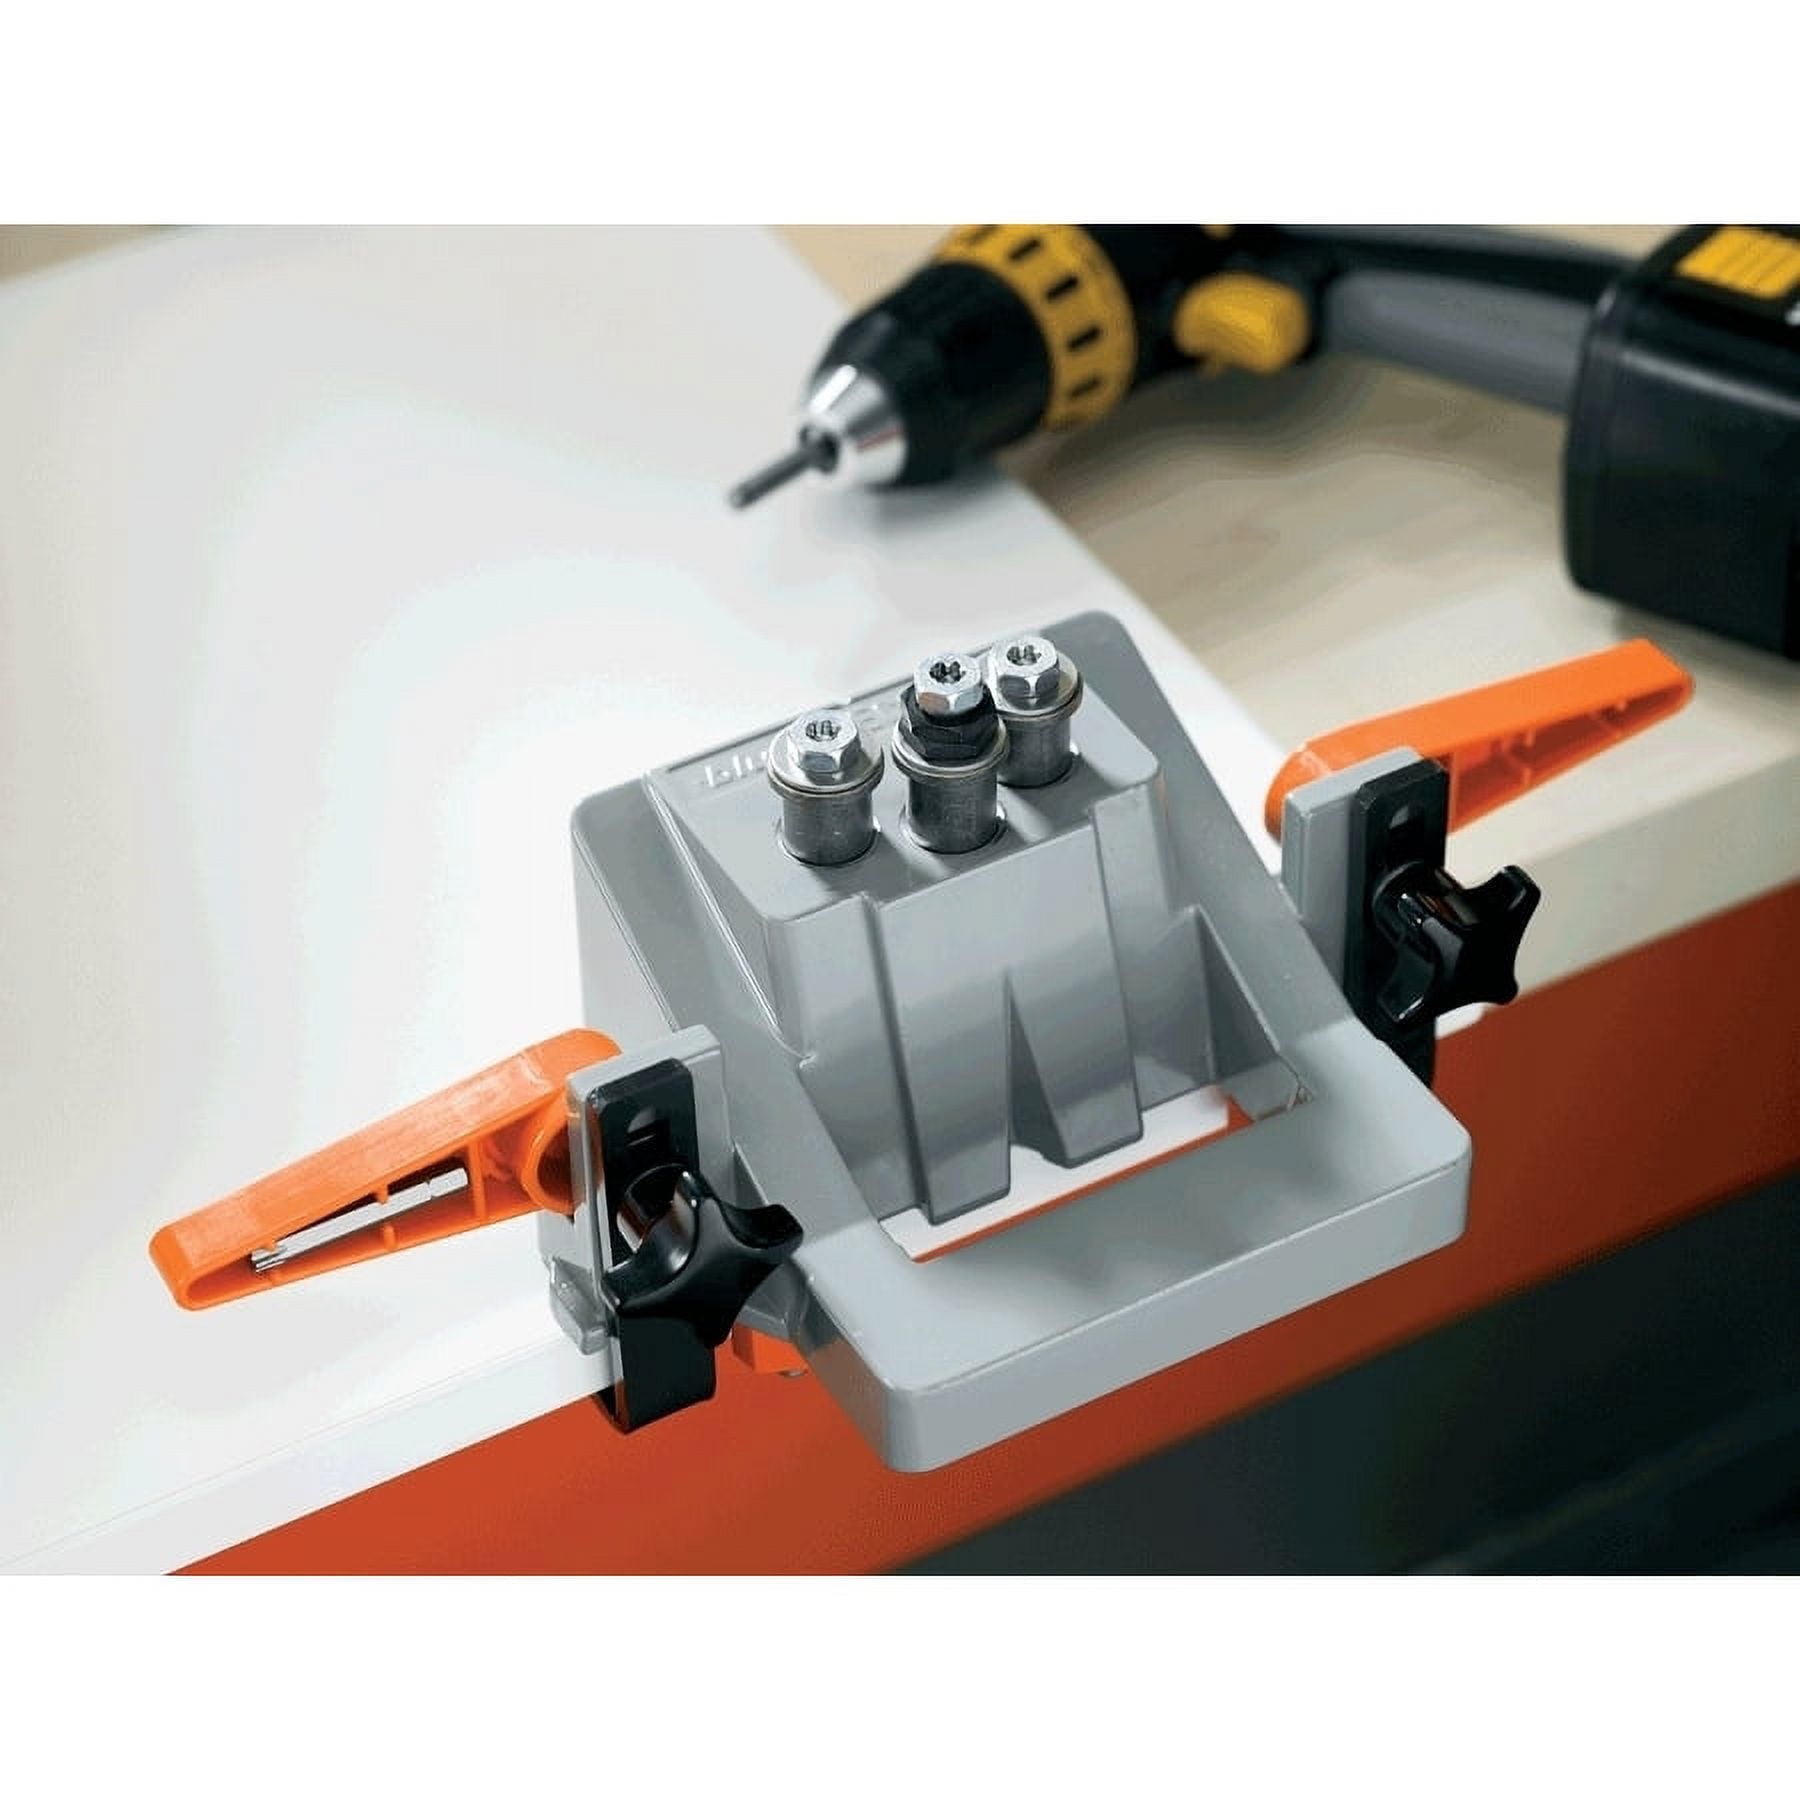 Blum ECODRILL Drilling Tool Hinge Jig with Bits and Drivers